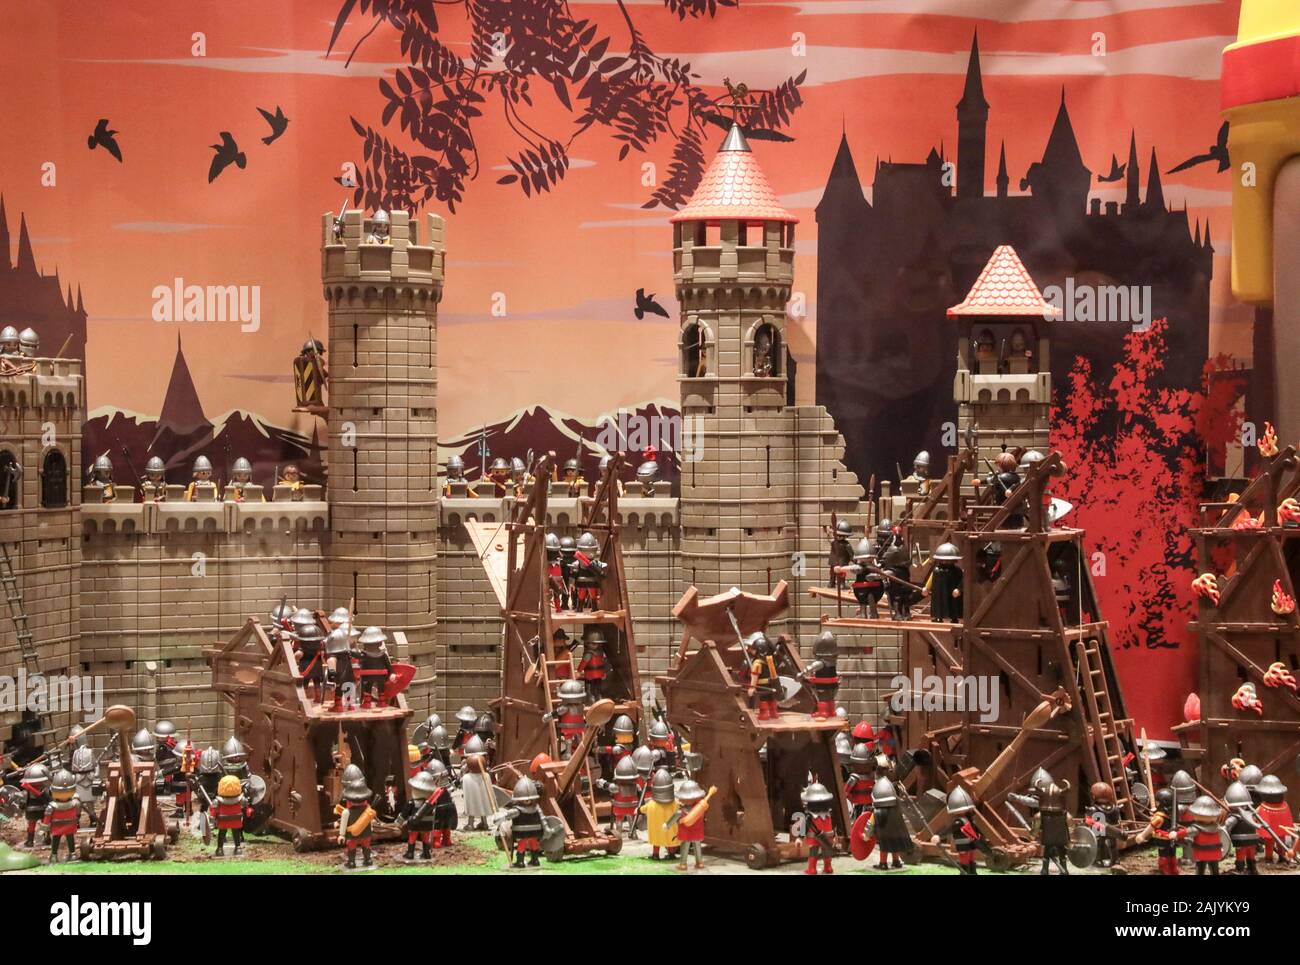 PLAYMOBIL EXHIBITION IN VERSAILLES , HOW TO SHOW THE HISTORY OF THE WORLD  Stock Photo - Alamy